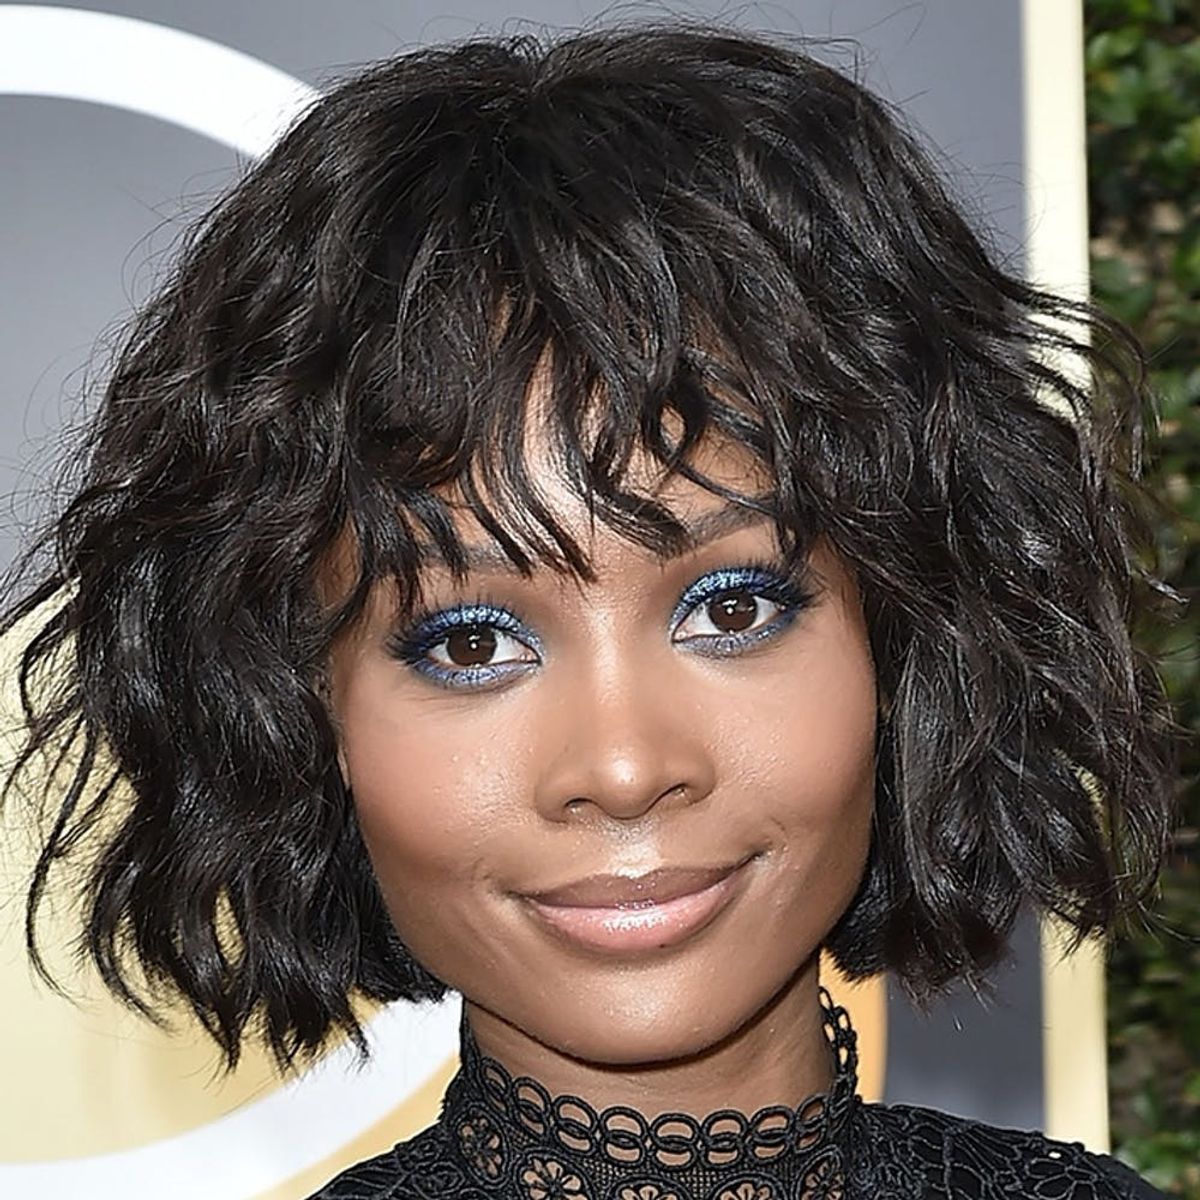 10 Celeb Hairstyles You’ll Want to Copy This Spring